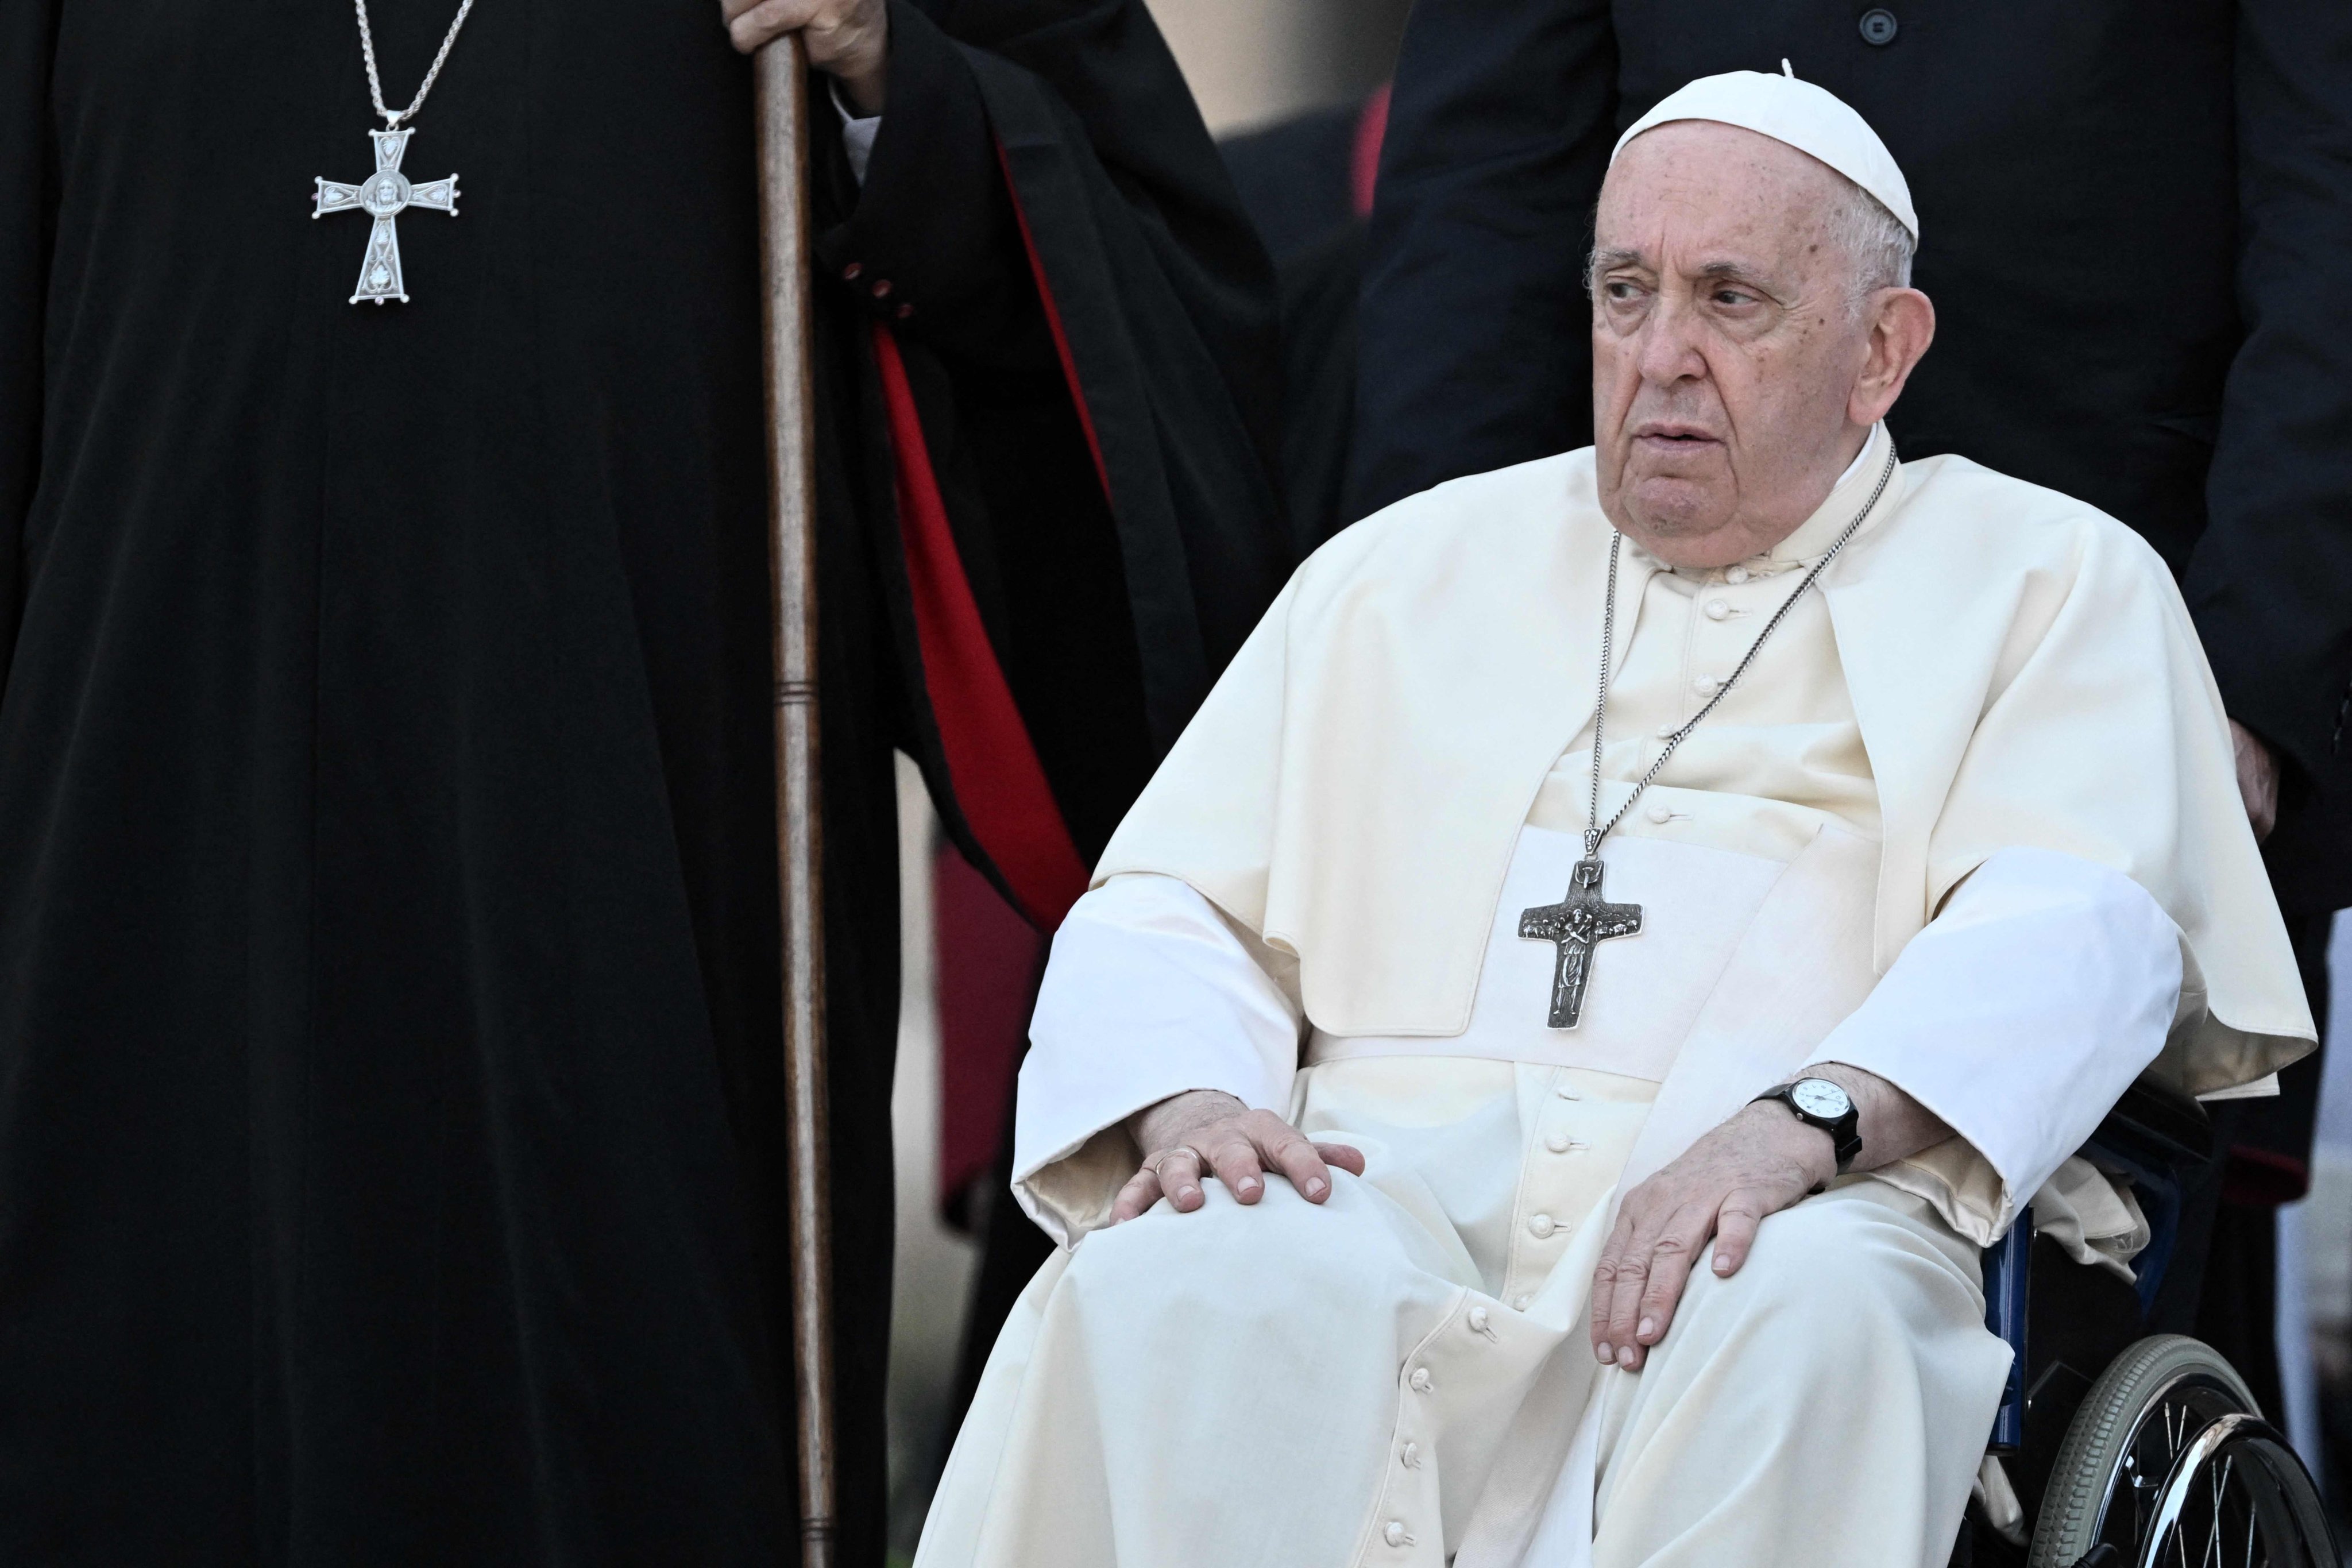 A group of conservative cardinals has asked Pope Francis to affirm the church cannot bless same-sex couples, and that any sexual act outside marriage between man and woman is a grave sin. Photo: AFP
